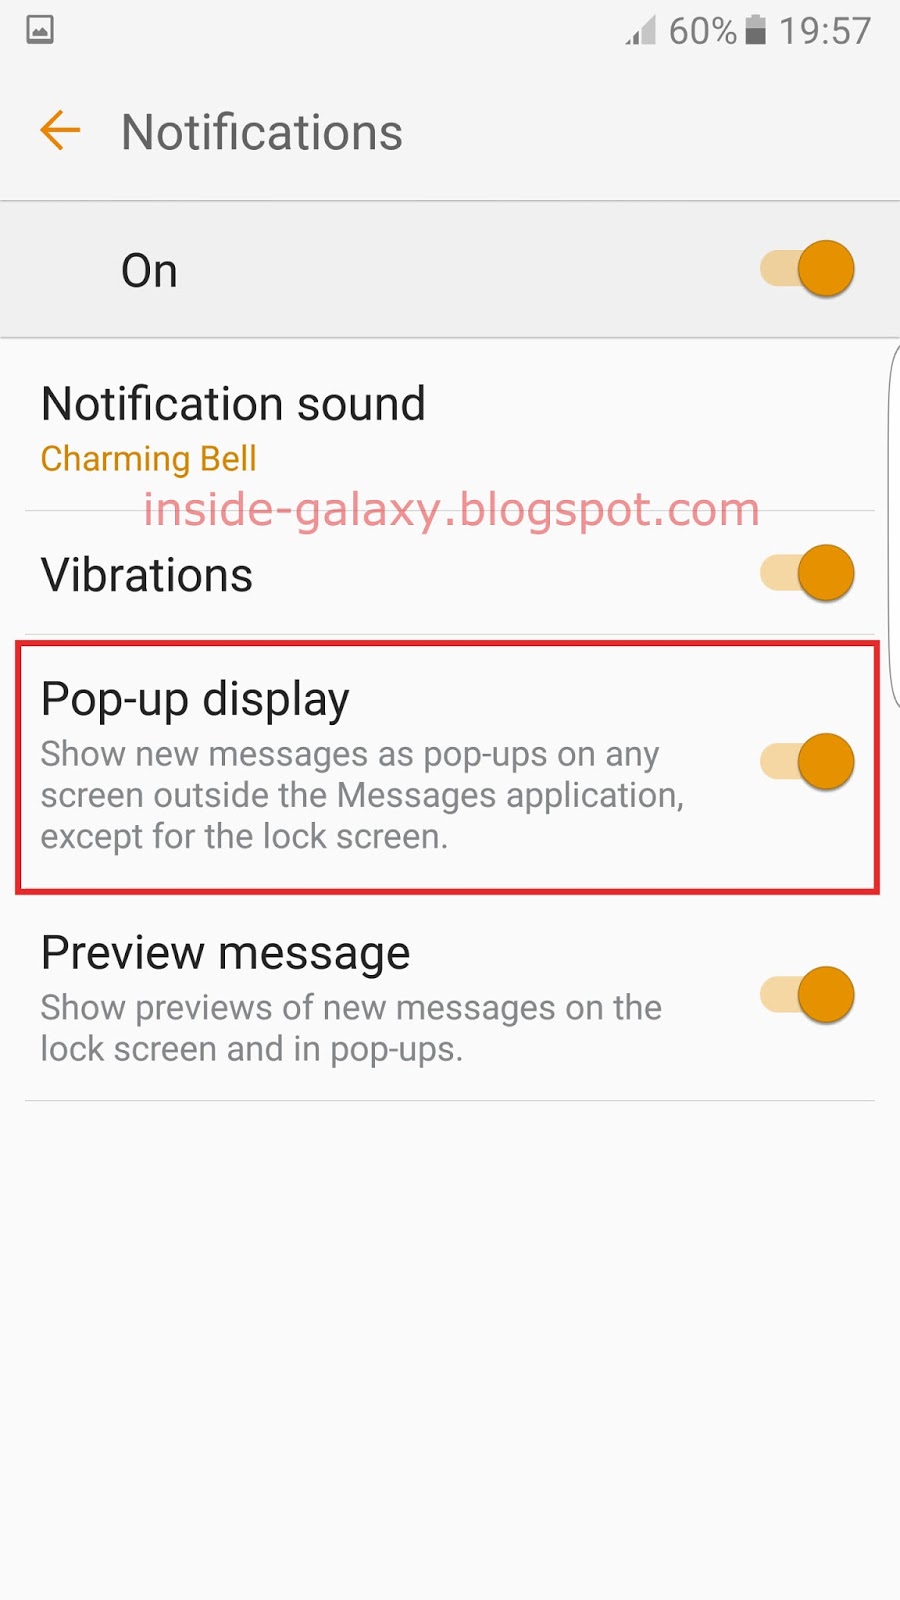 Indtil nu bekræfte teater Inside Galaxy: Samsung Galaxy S7 Edge: How to Enable and Use Pop-Up Display  Feature in Messages App in Android 6.0.1 Marshmallow